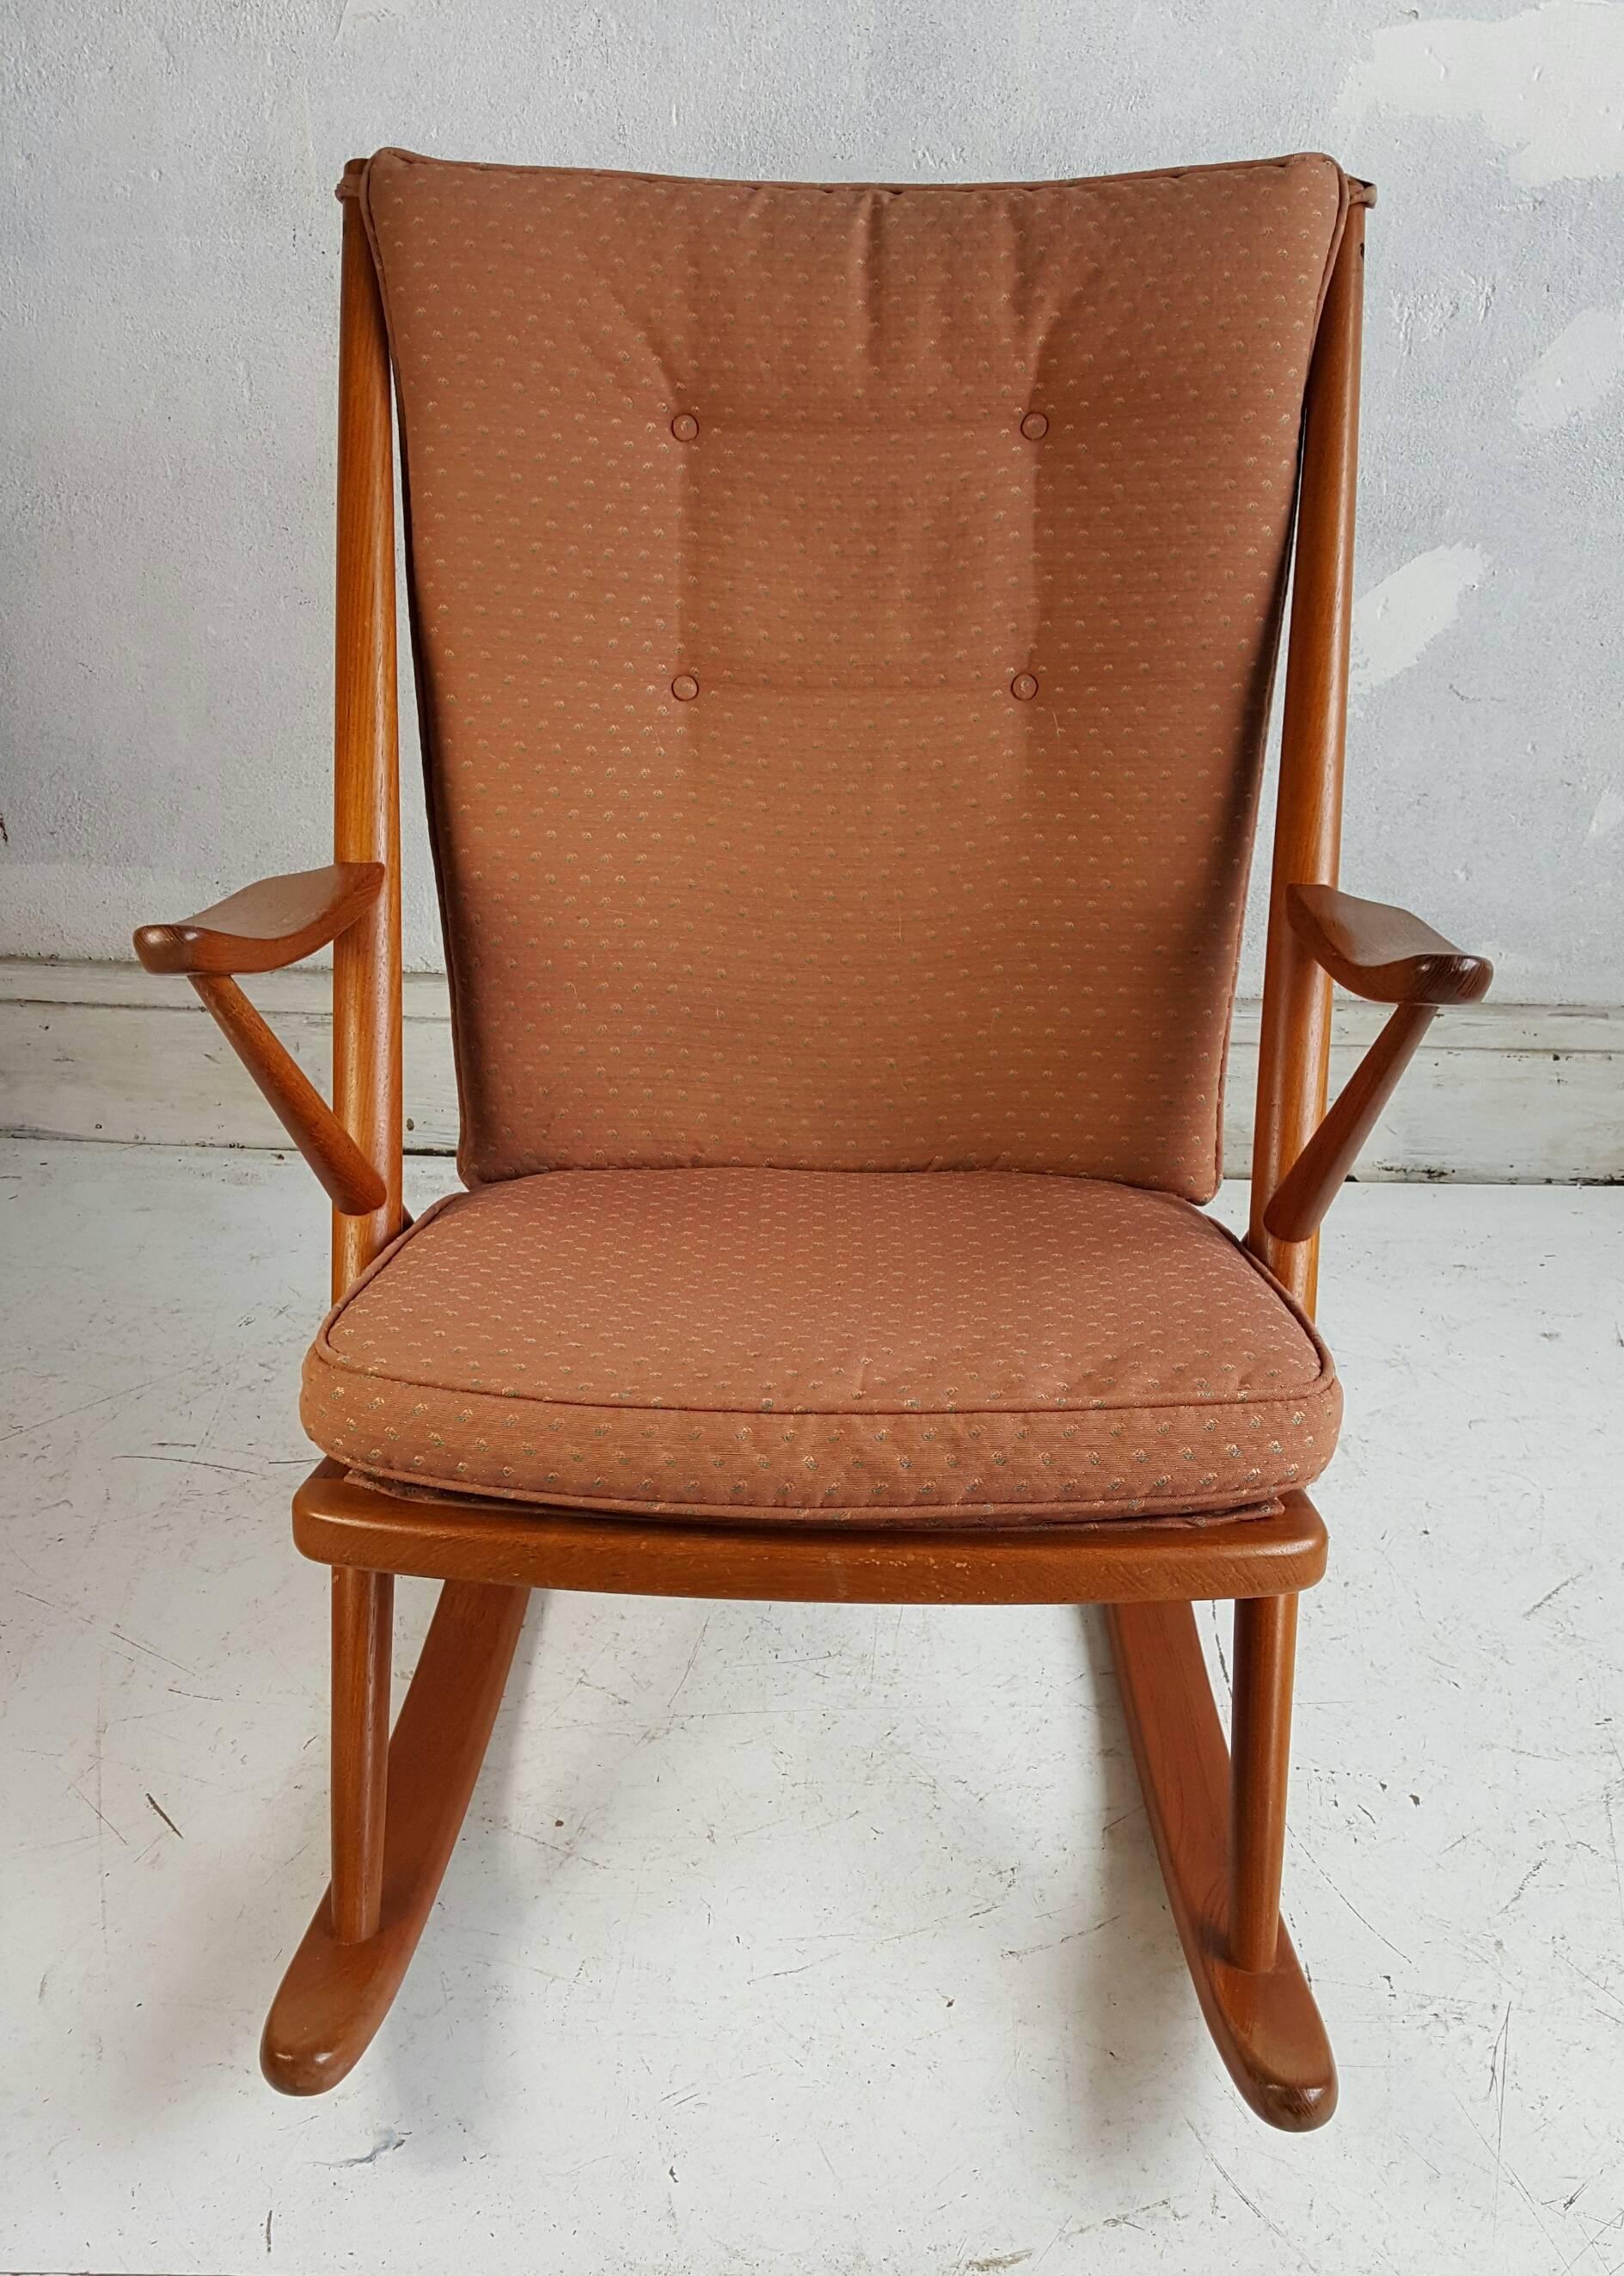 Danish modern Mid-Century rocking chair. Crafted in teak and designed by Frank Reenskaug for Bramin, Recently recovered, teak frame is in excellent vintage condition with typical wear for its vintage.